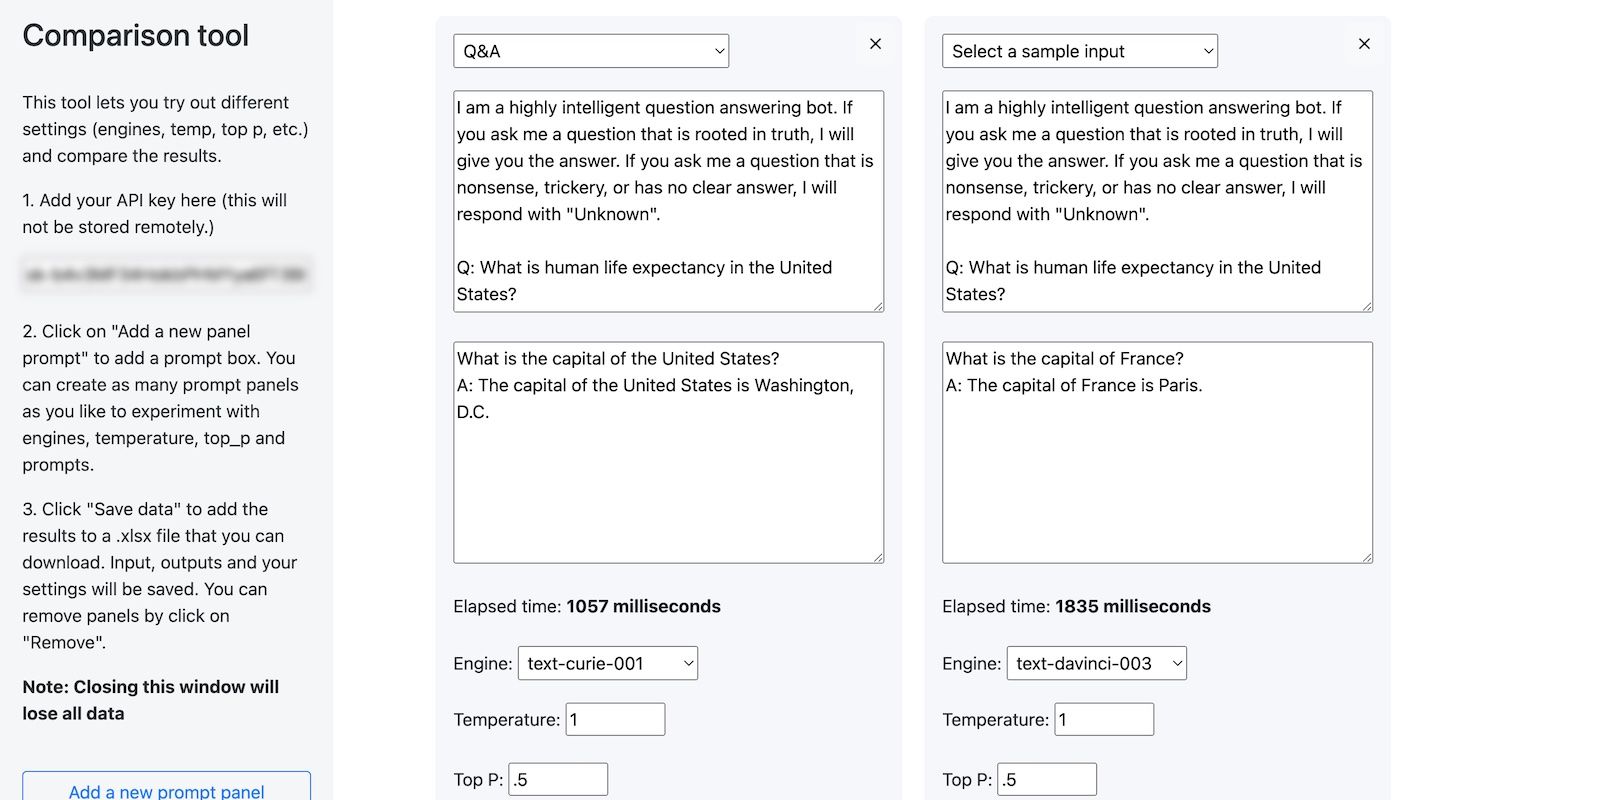 Using GPTtools Comparison Tool to Compare Q&A on LLMs